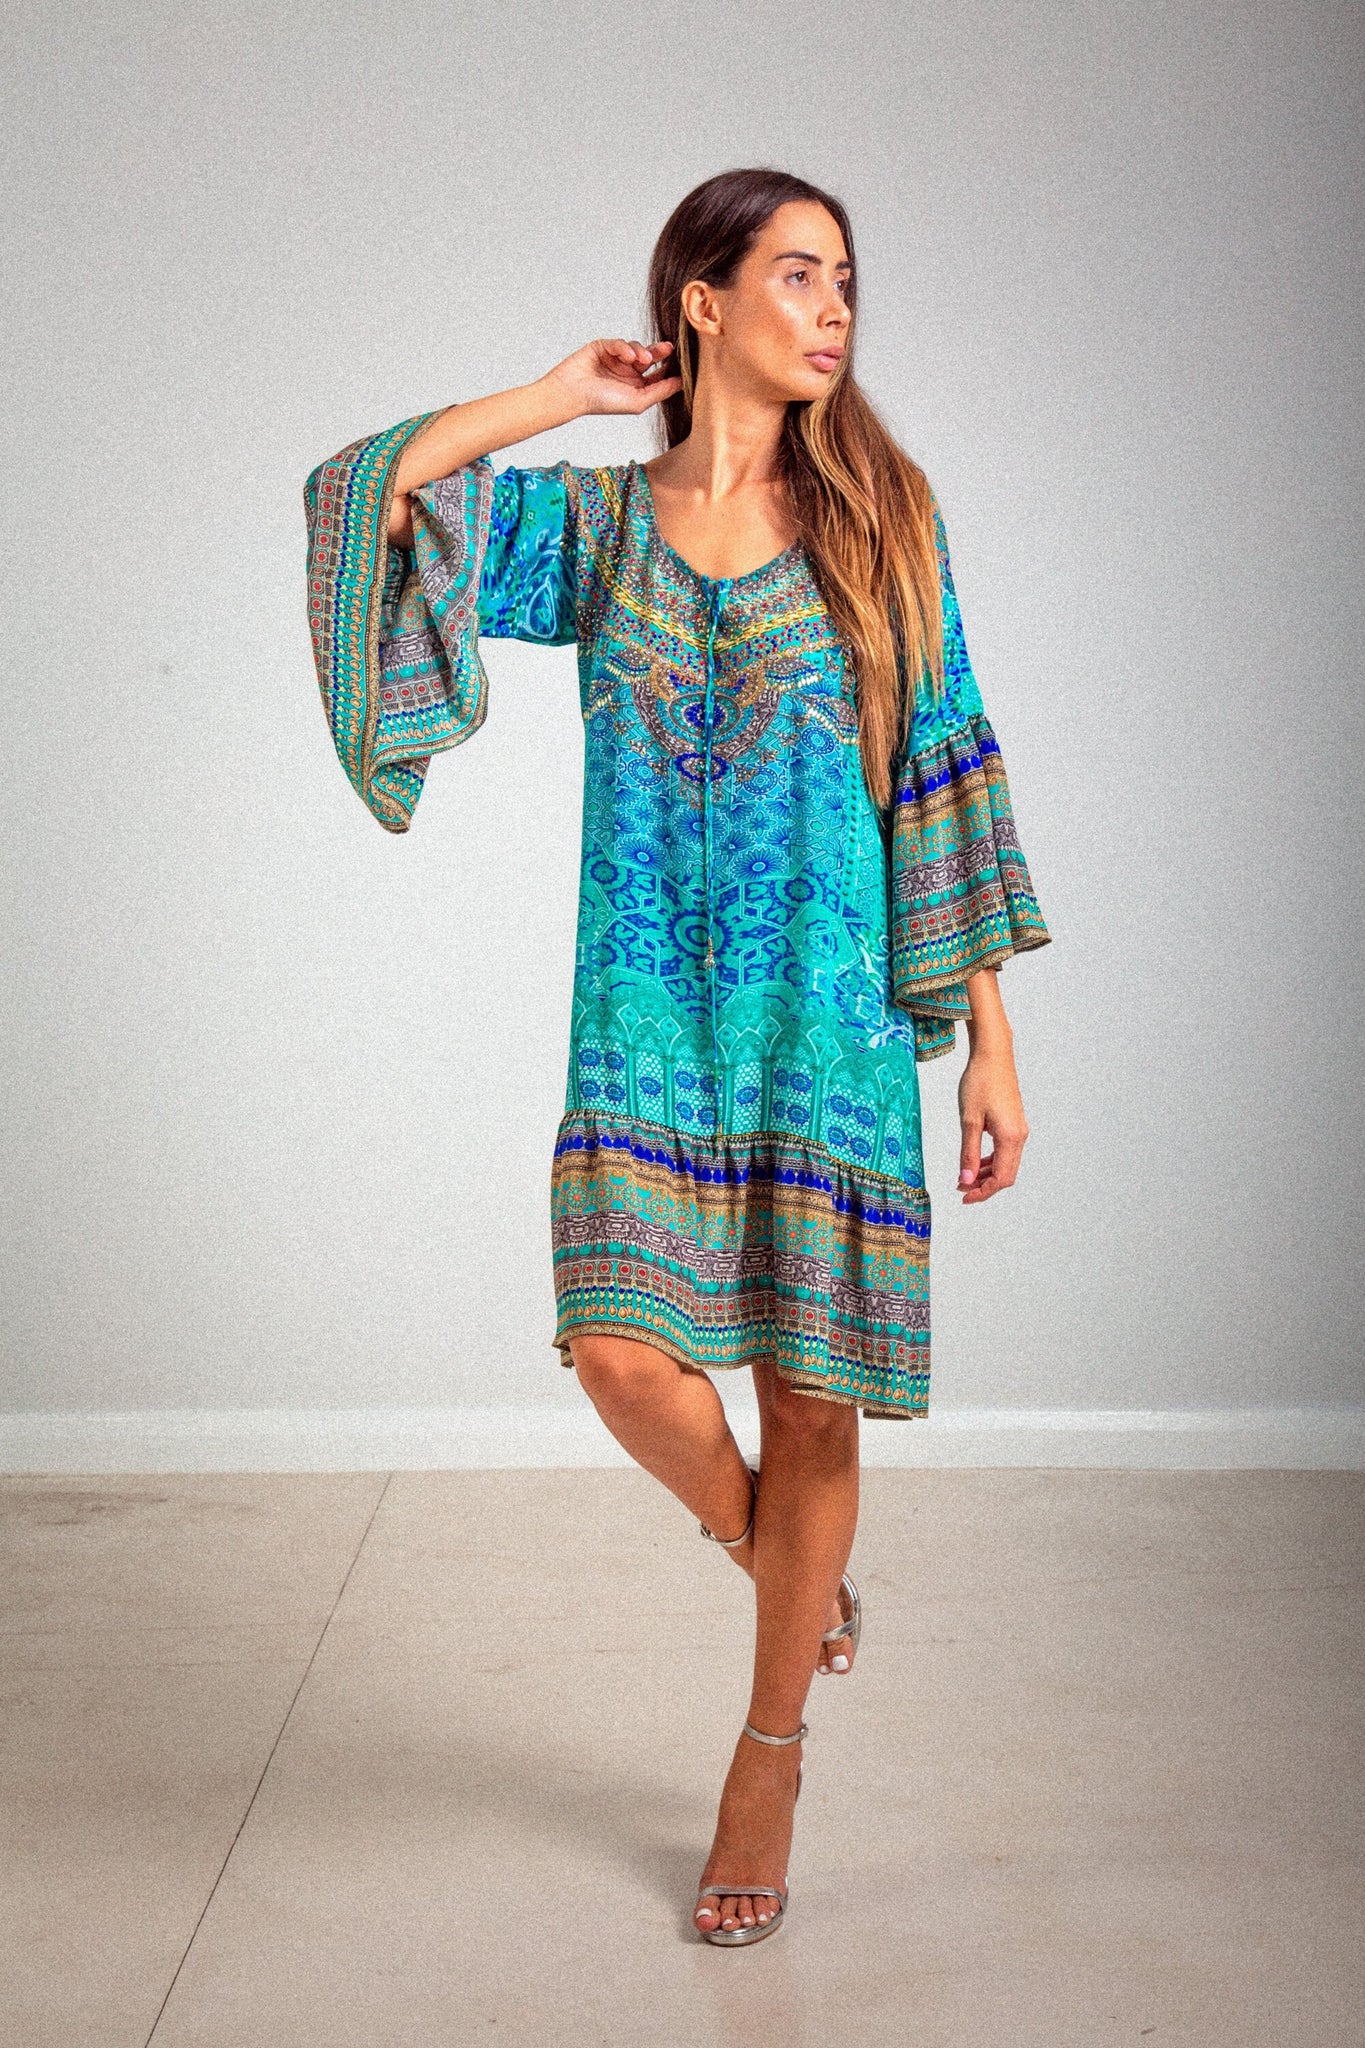 Buy Inoa Gypsy Dress in Atlantis Silk online now at Smoke and Mirrors Boutique. Inoa stockists Australia. Inoa online stockists. Buy Inoa with ZipPay. Buy Inoa with AfterPay. 